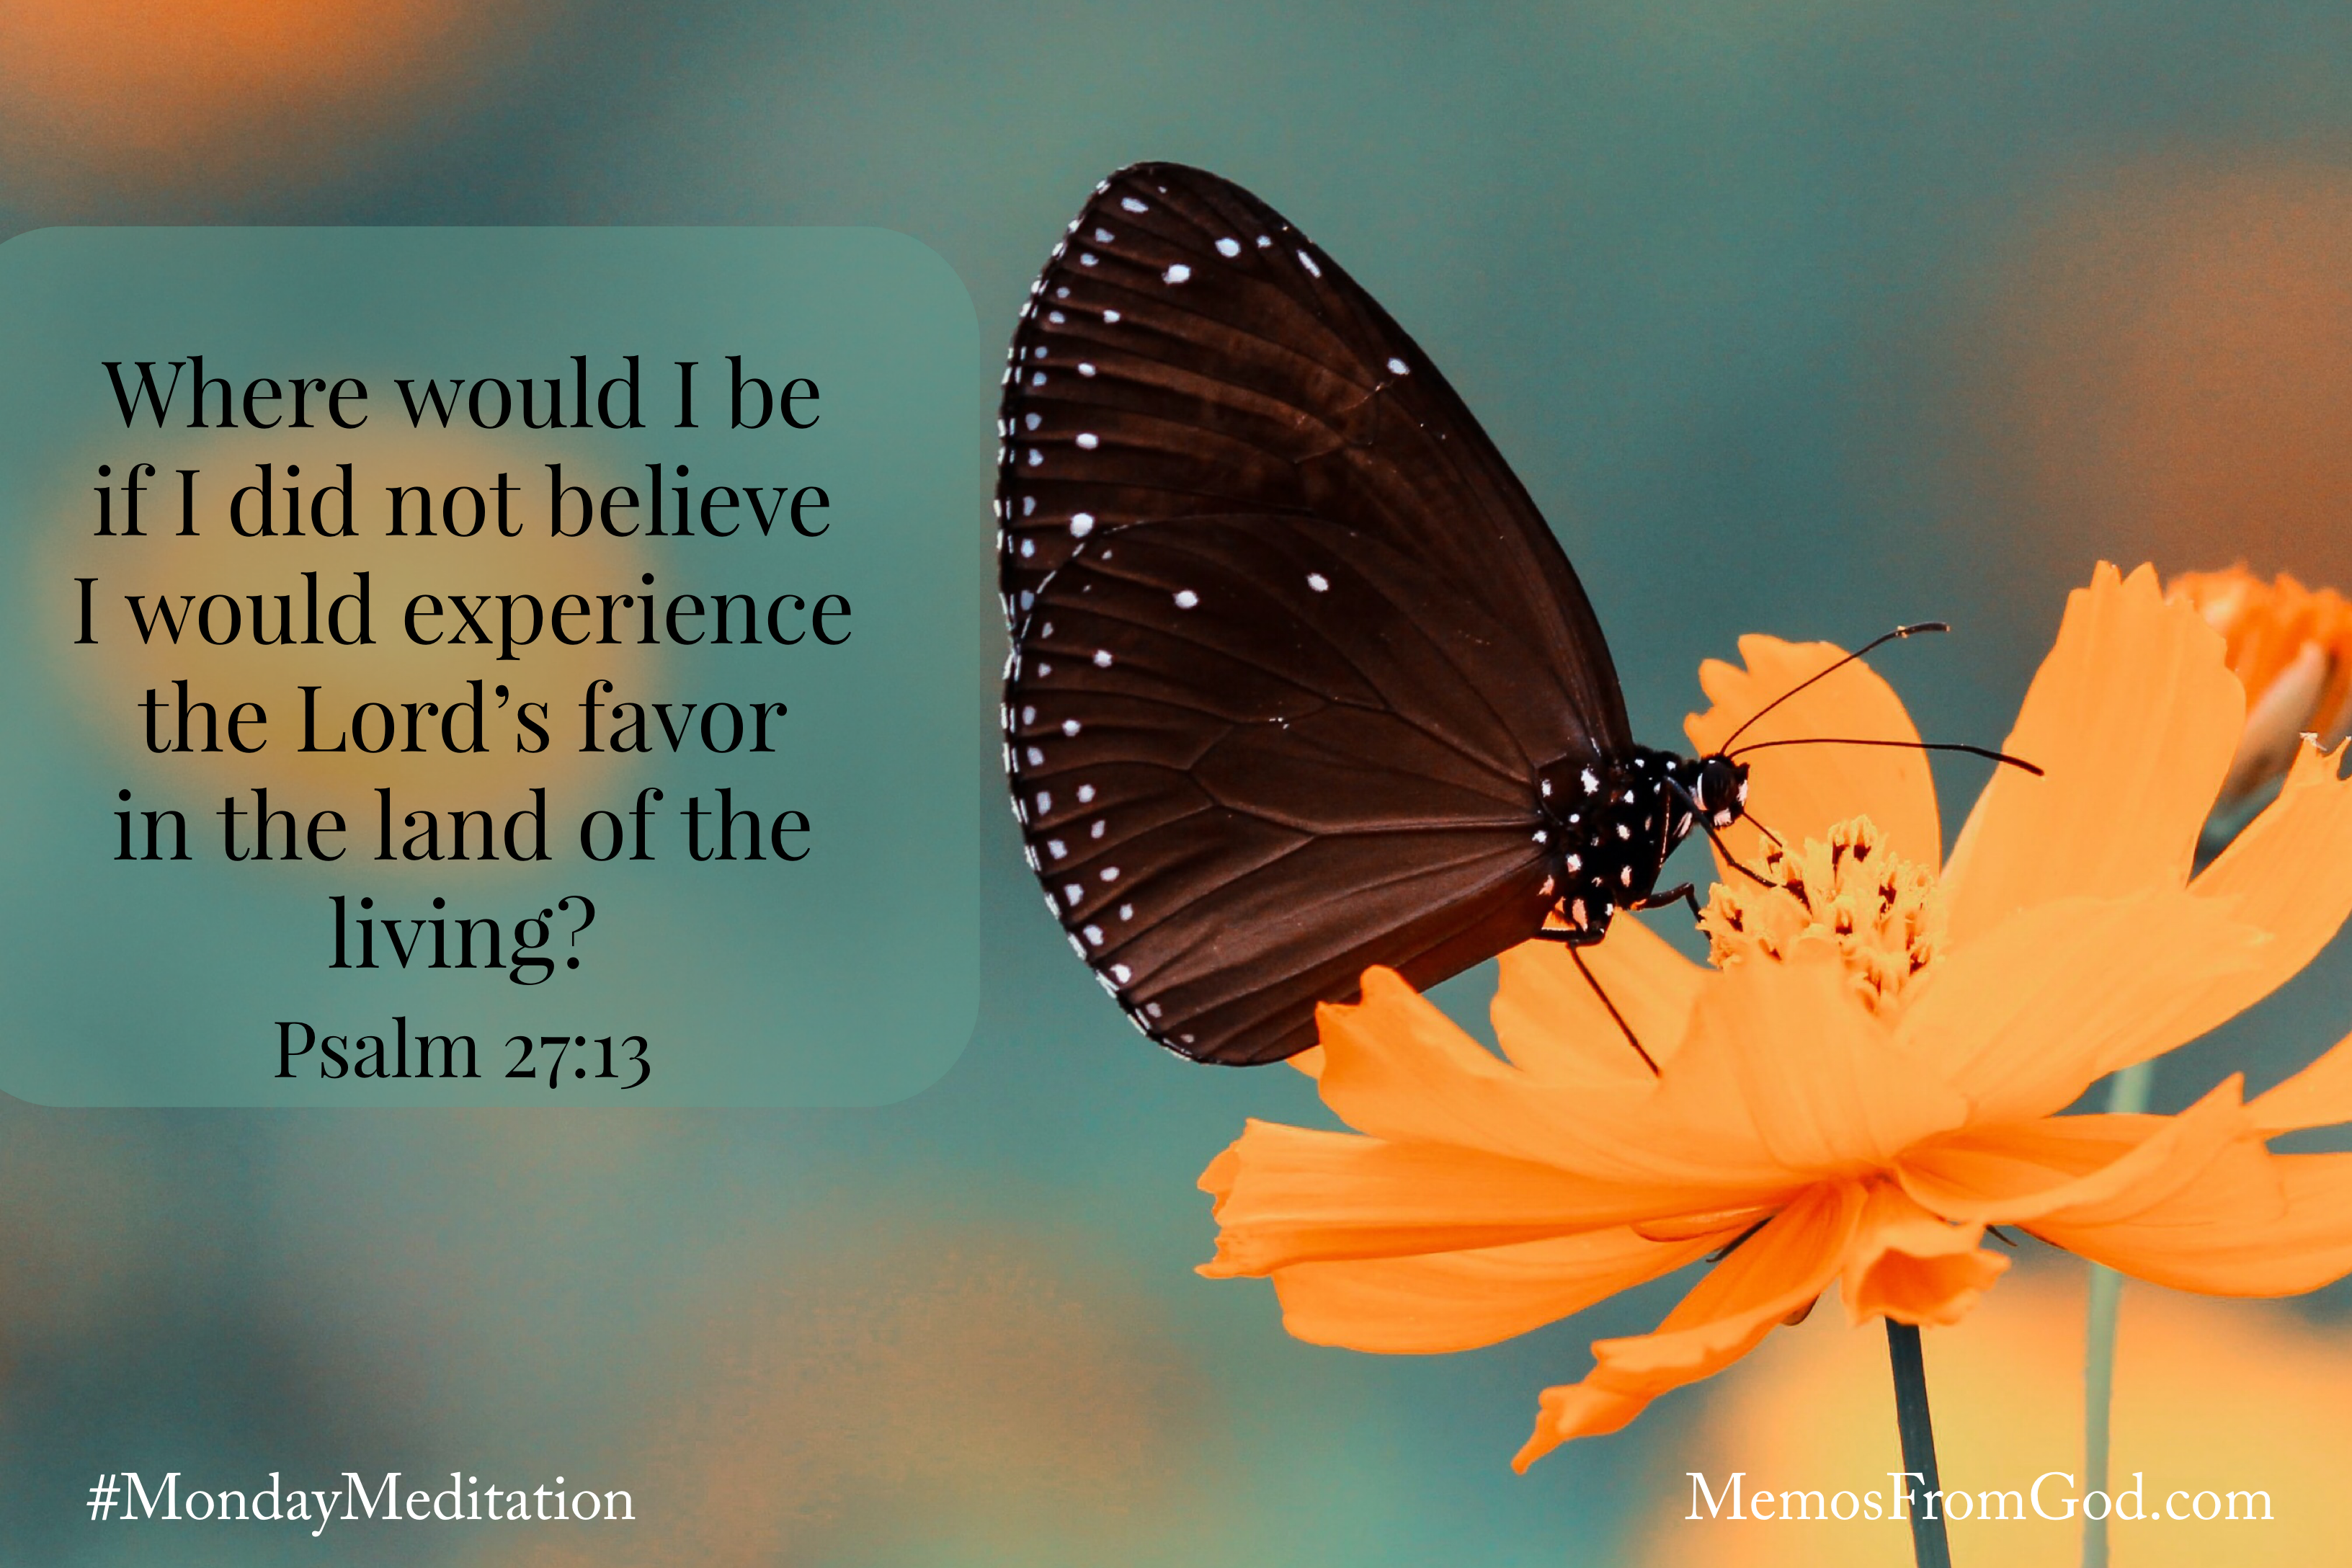 A brown butterfly with white spots on a bright orange flower. Caption: Where would I be if I did not believe I would experience the Lord’s favor in the land of the living? Psalm 27:13